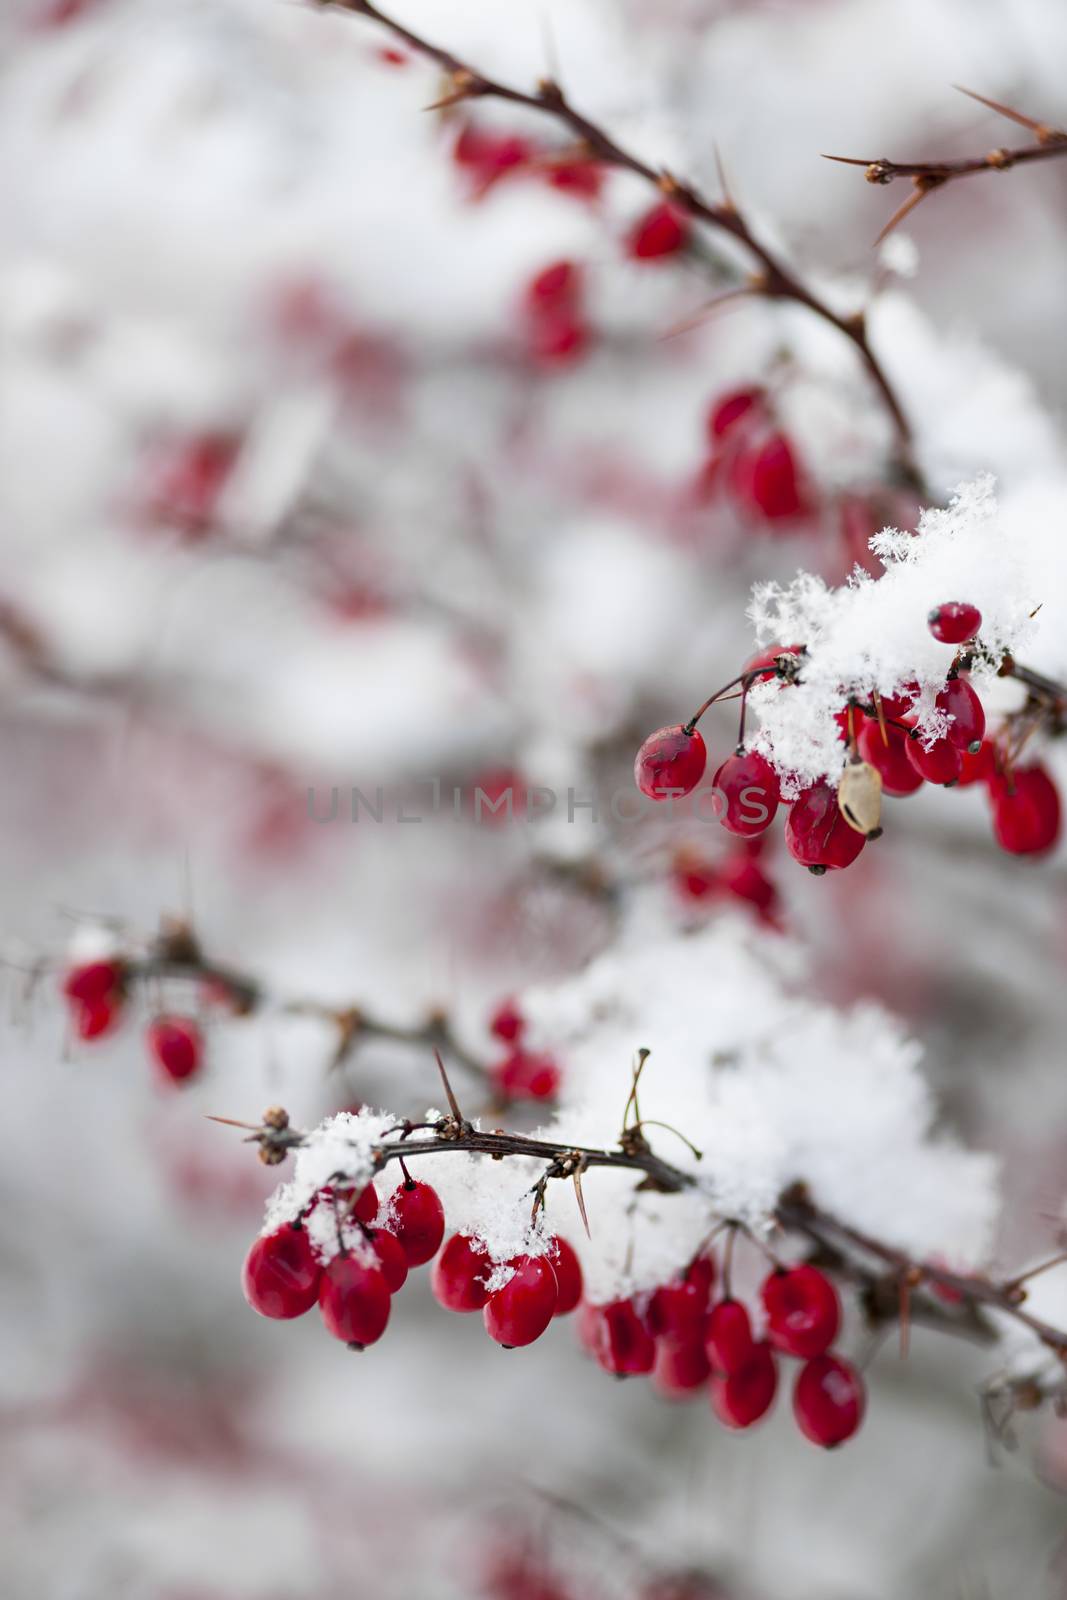 Snowy red barberry berries closeup in winter